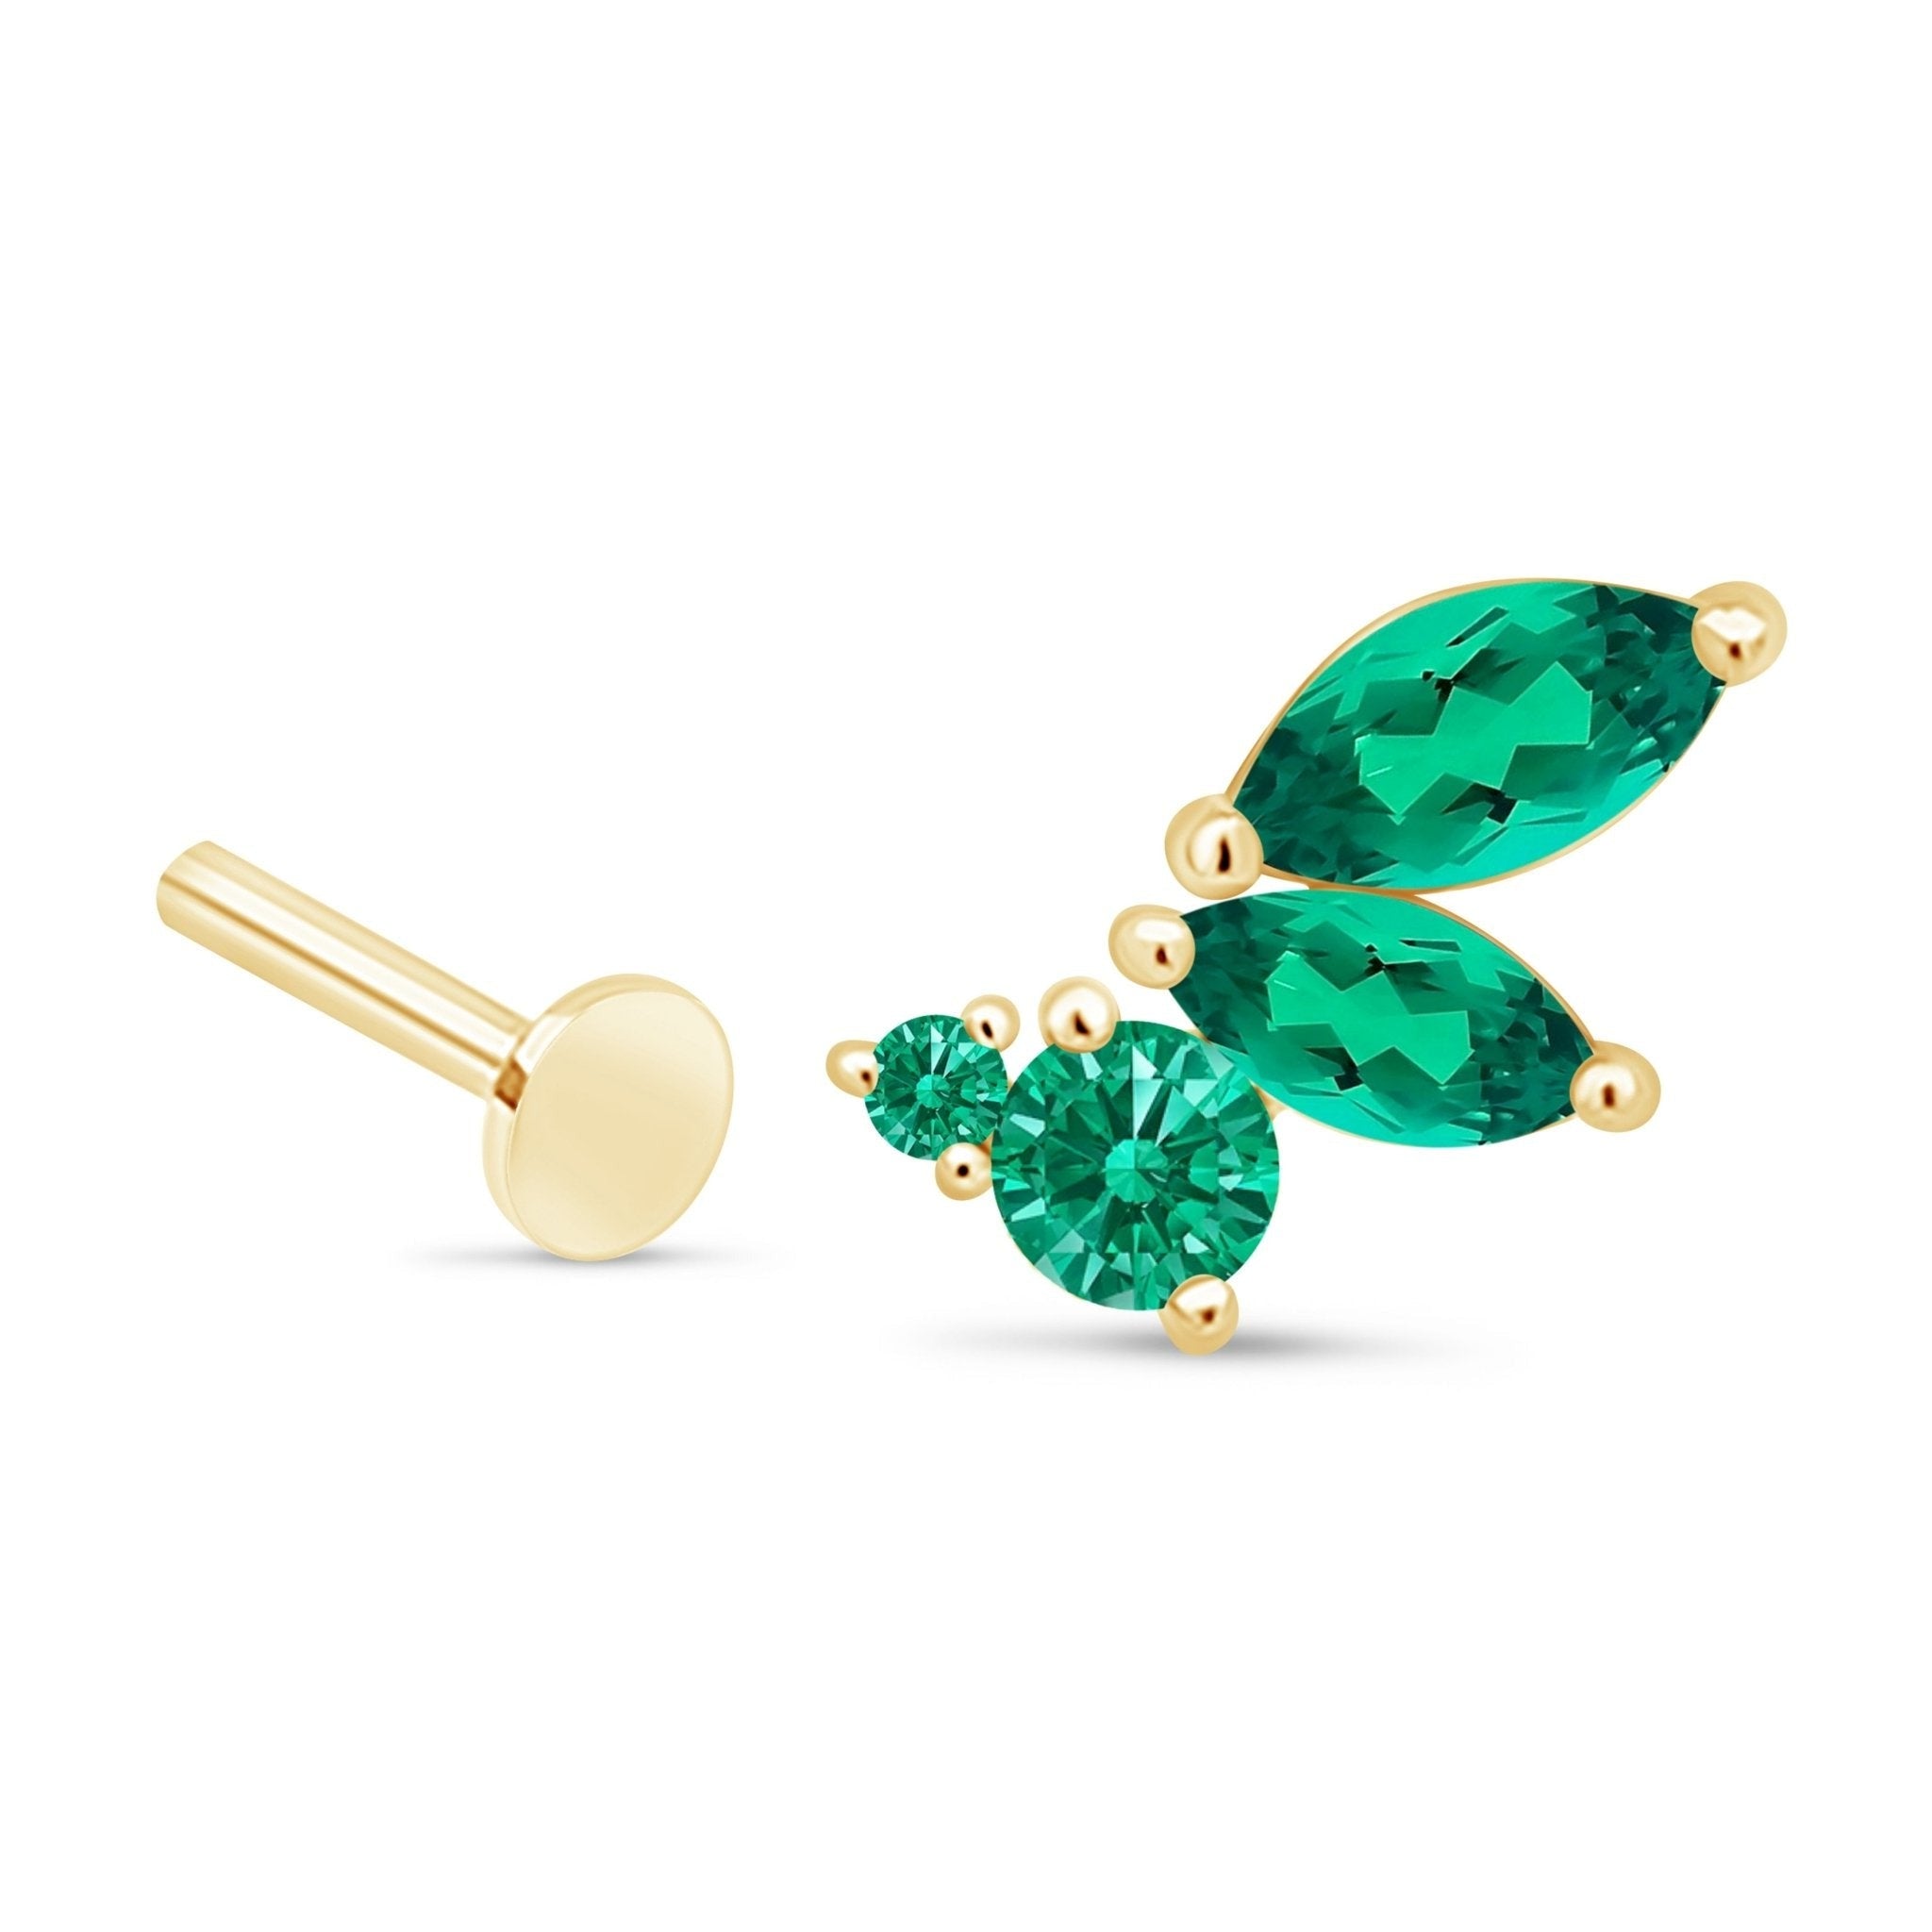 Green Emerald Marquise Wing Flat Back Earring Earrings Estella Collection #product_description# 18576 test test mechanic #tag4# #tag5# #tag6# #tag7# #tag8# #tag9# #tag10#